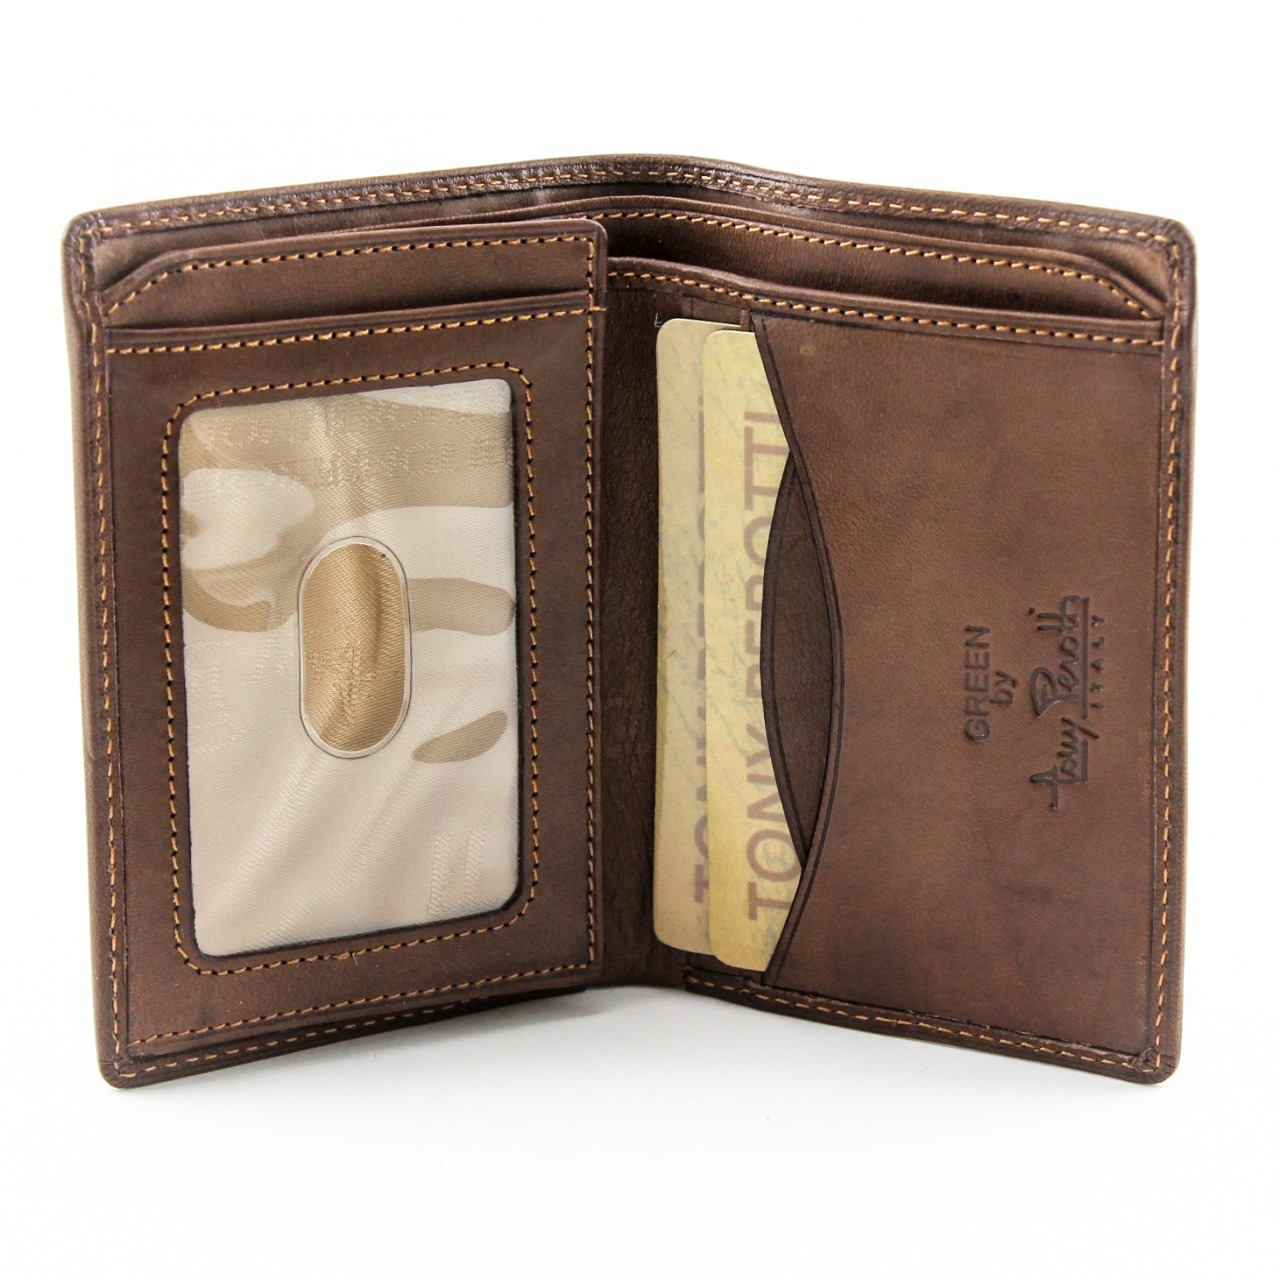 Tony Perotti Mens Italian Cow Leather Front Pocket Vertical Bifold Wallet with ID Window Flap